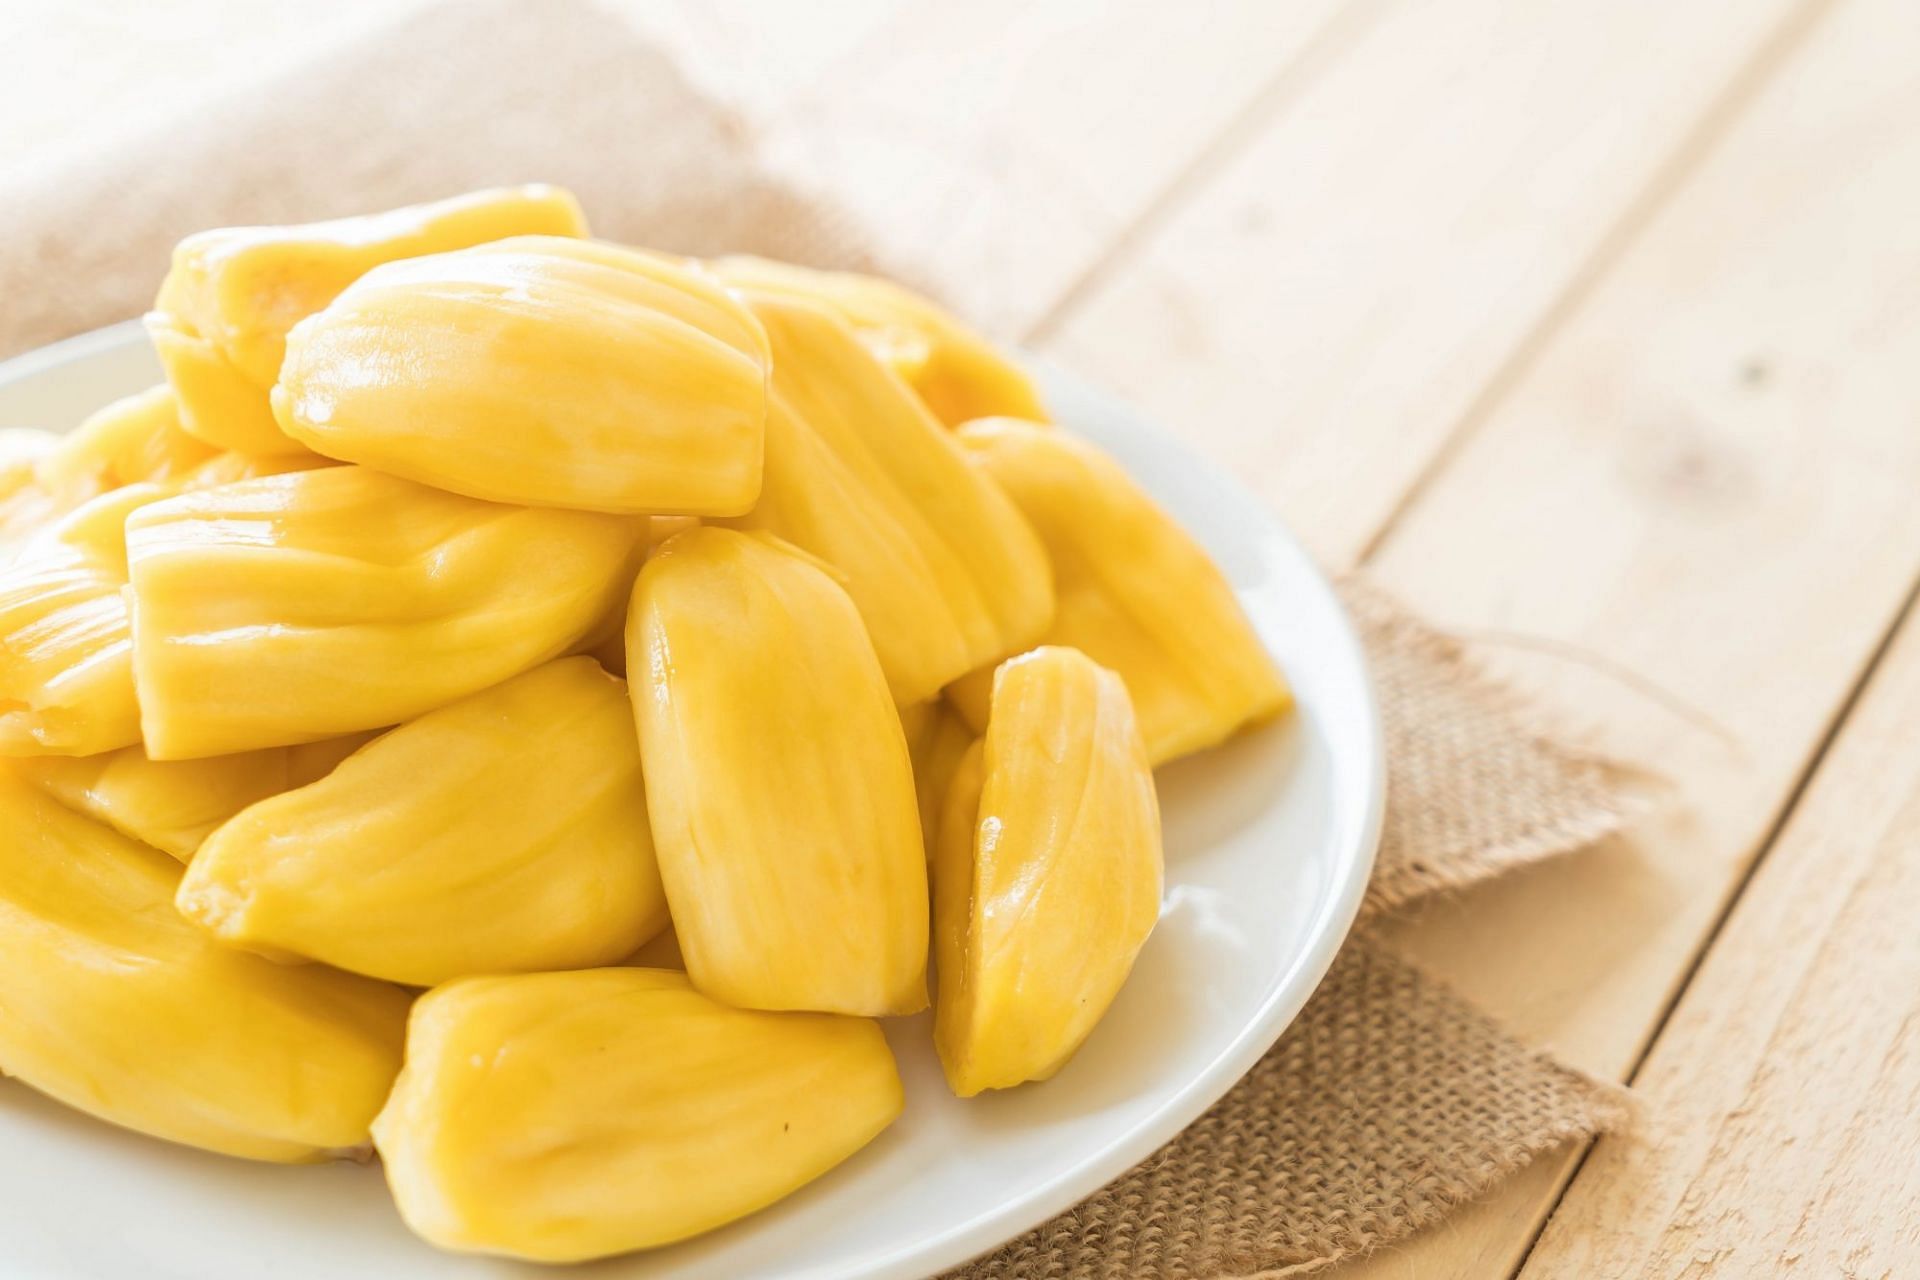 Boosting immunity is among the most potential benefits of jackfruit (Image via Freepic)